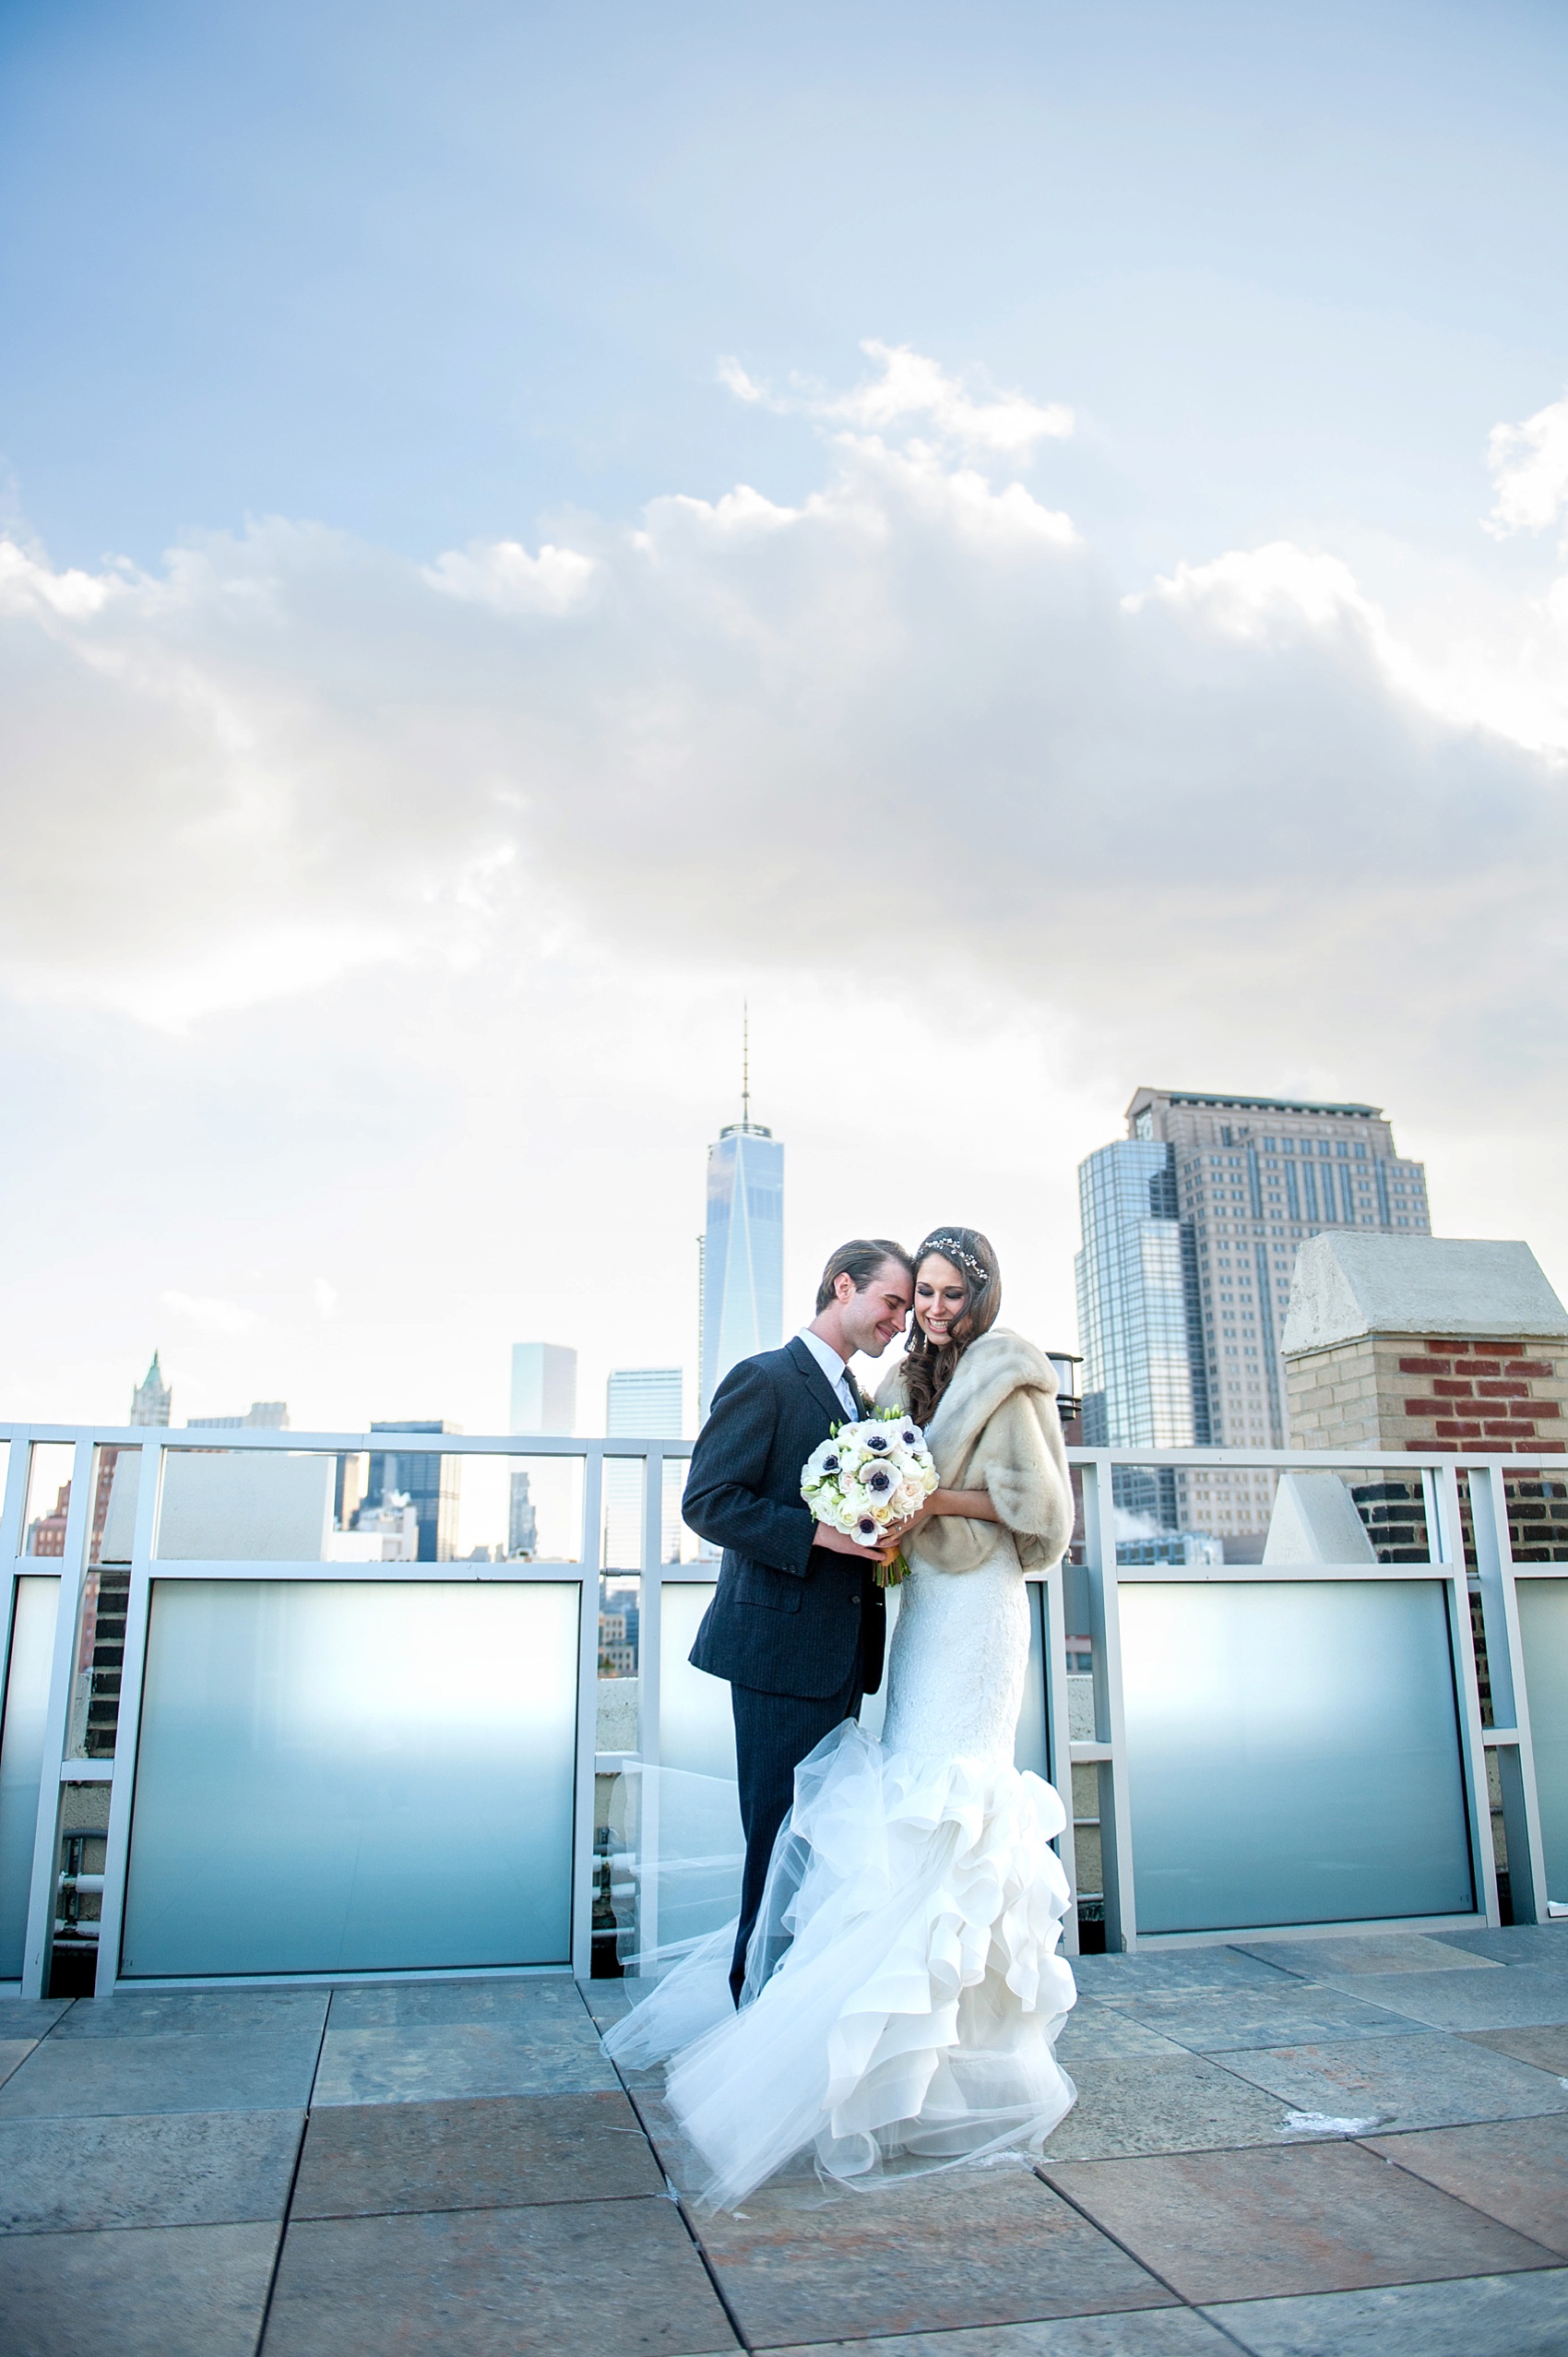 Freedom Tower view from Tribeca Rooftop. Bride and groom wedding photo in February. Never forget. Image by Mikkel Paige Photography, NYC wedding photographer.